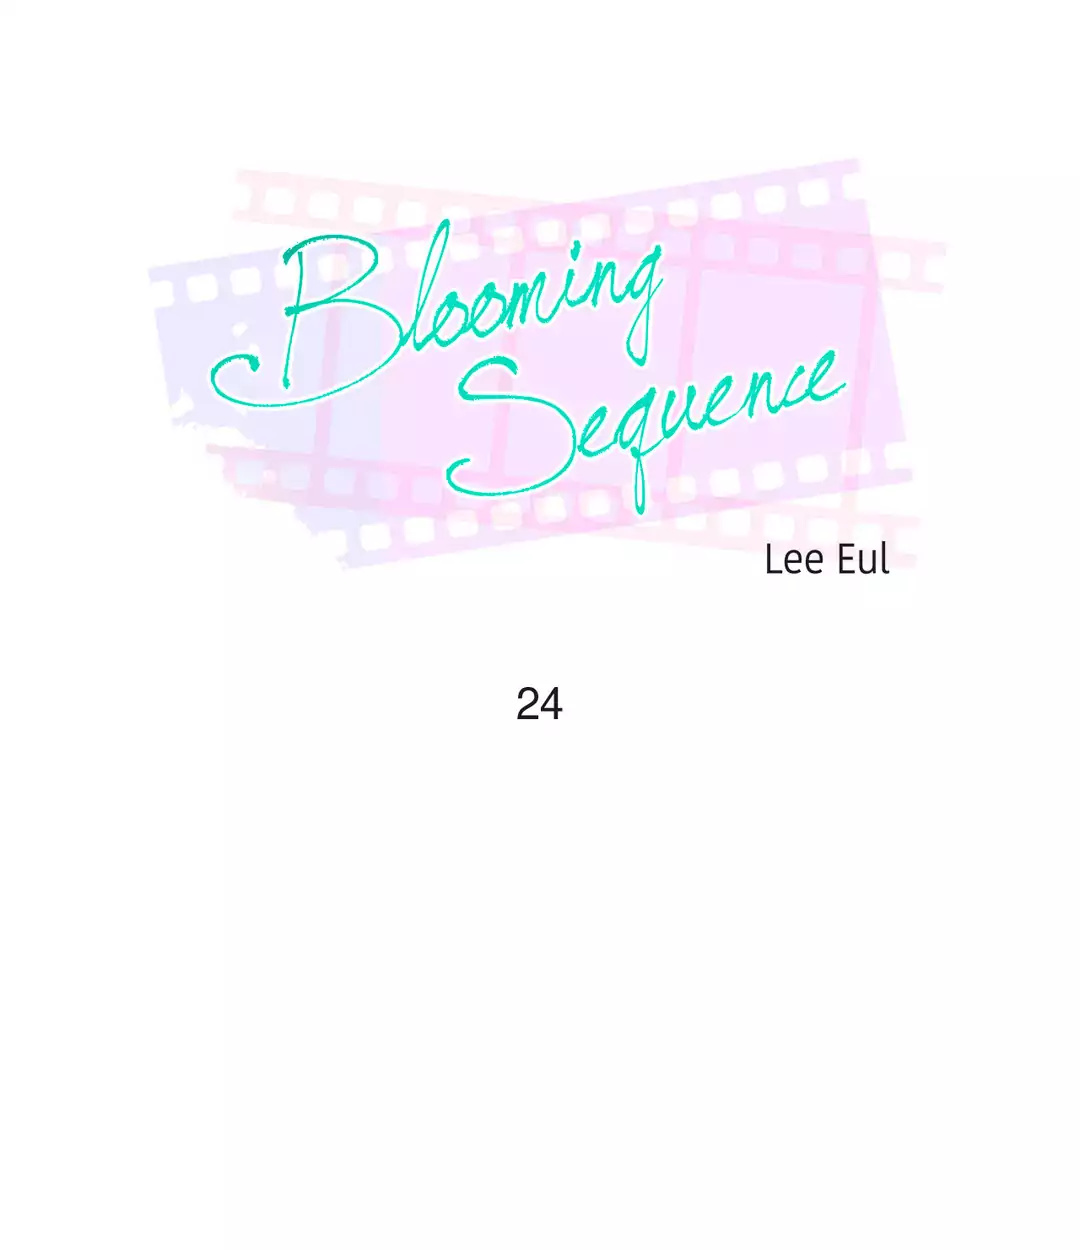 Blooming Sequence image